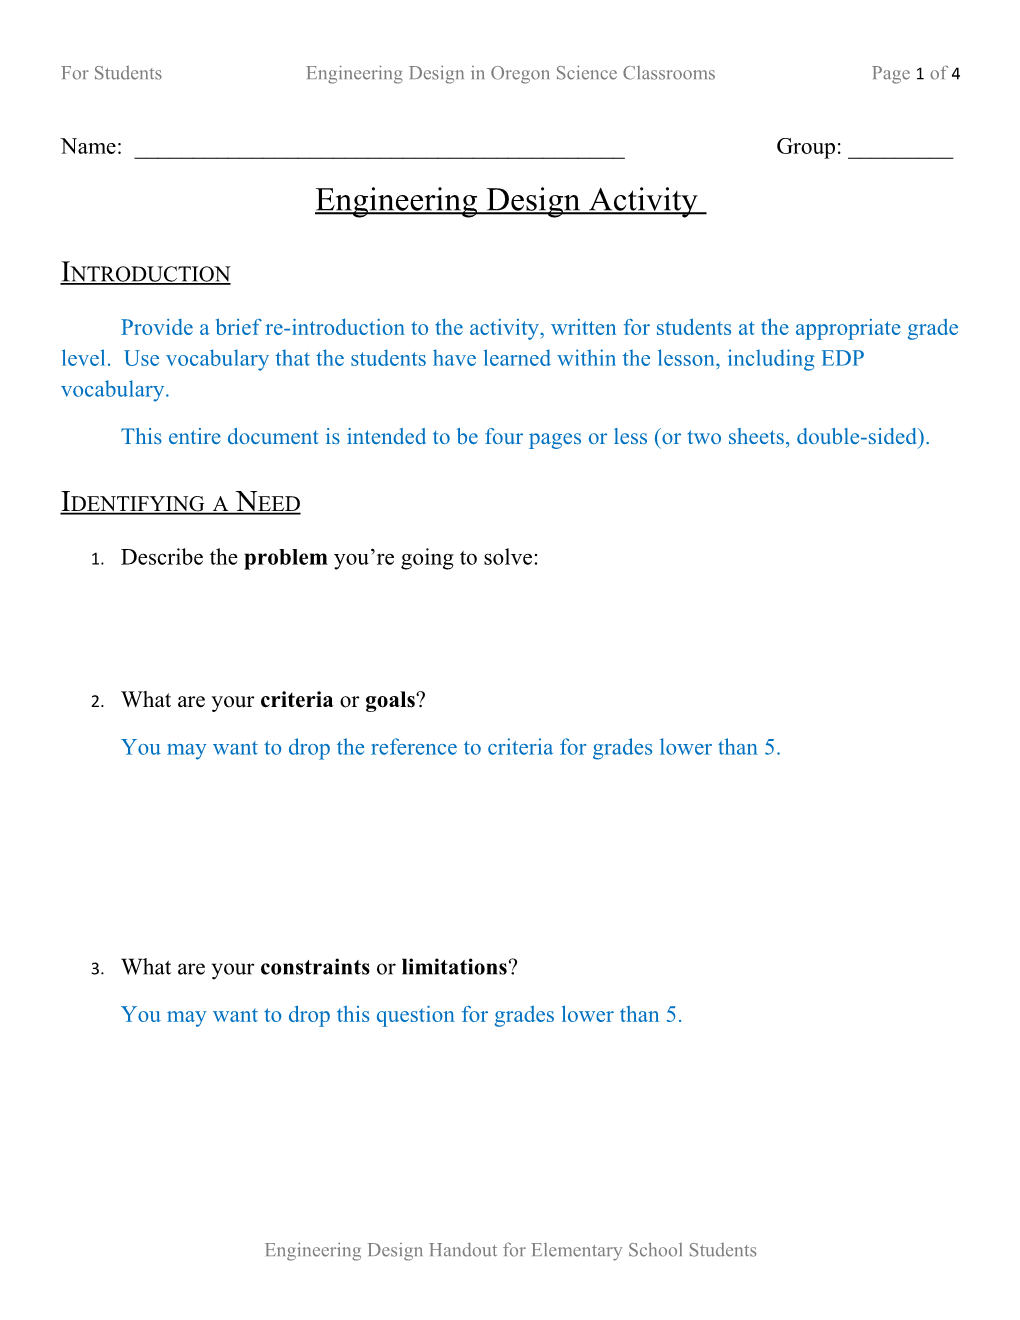 For Studentsengineering Design in Oregon Science Classroomspage 1 of 4